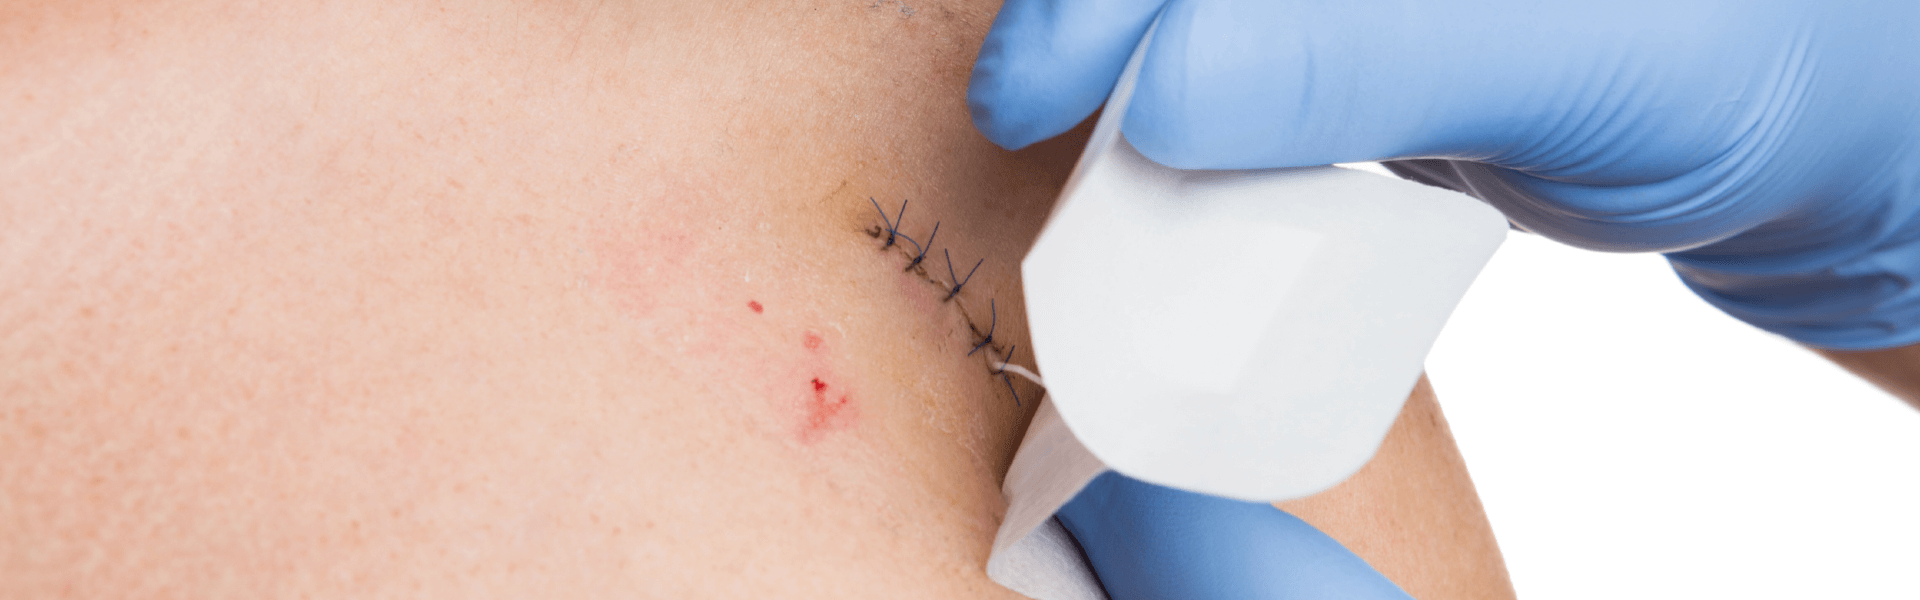 Suture Removal